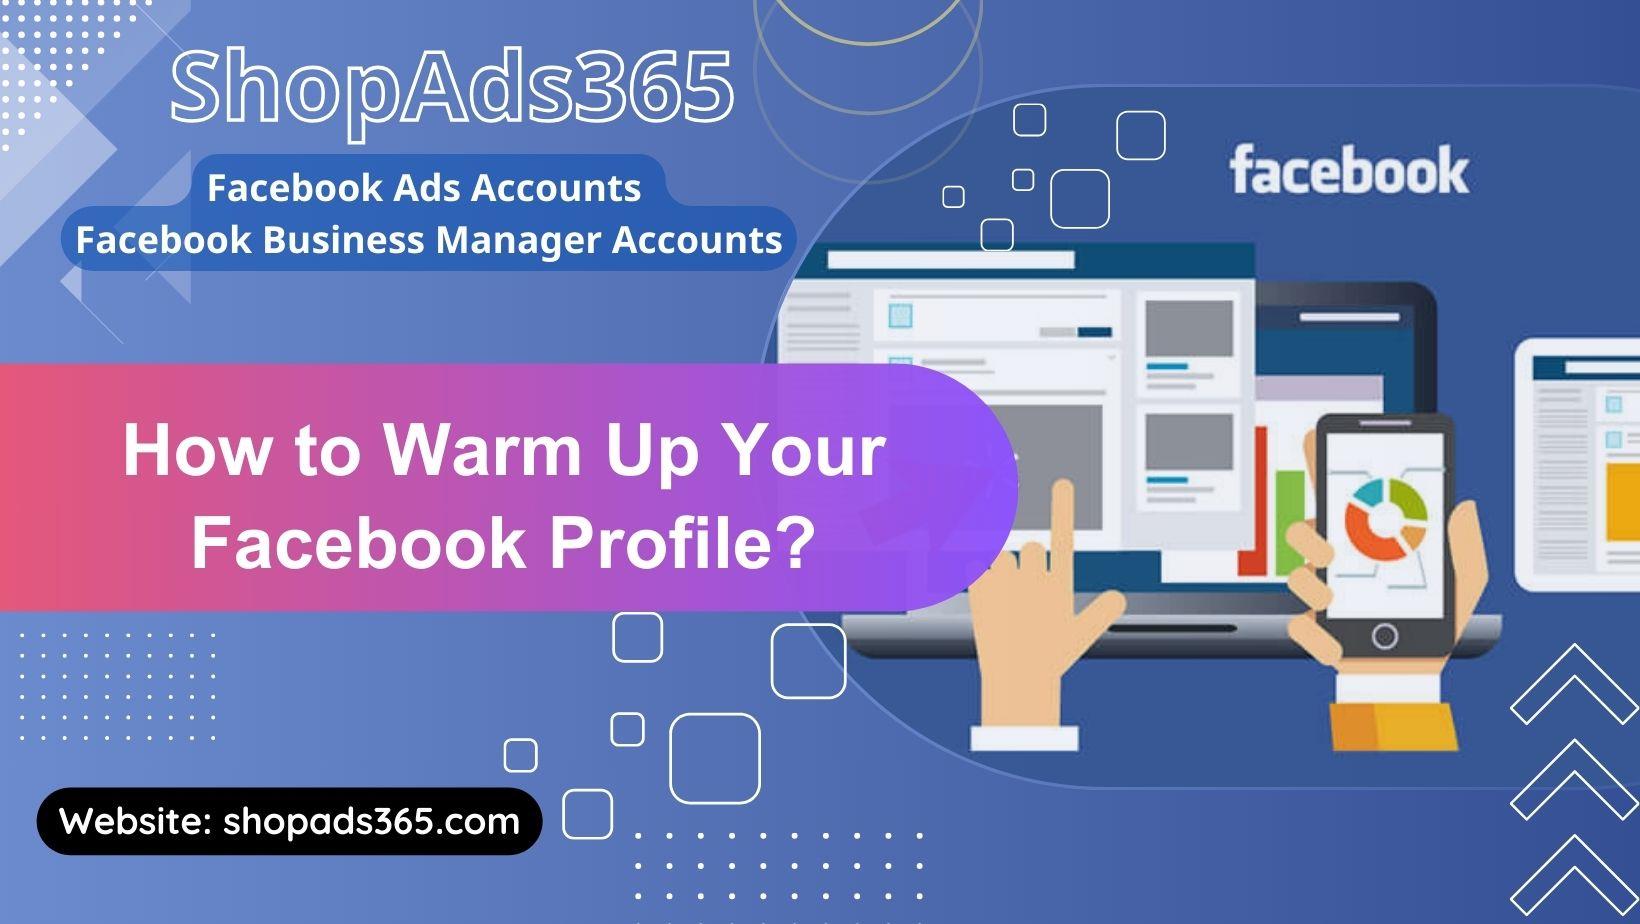 How to Warm Up Your Facebook Profile: Tips and Strategies for Avoiding Penalties